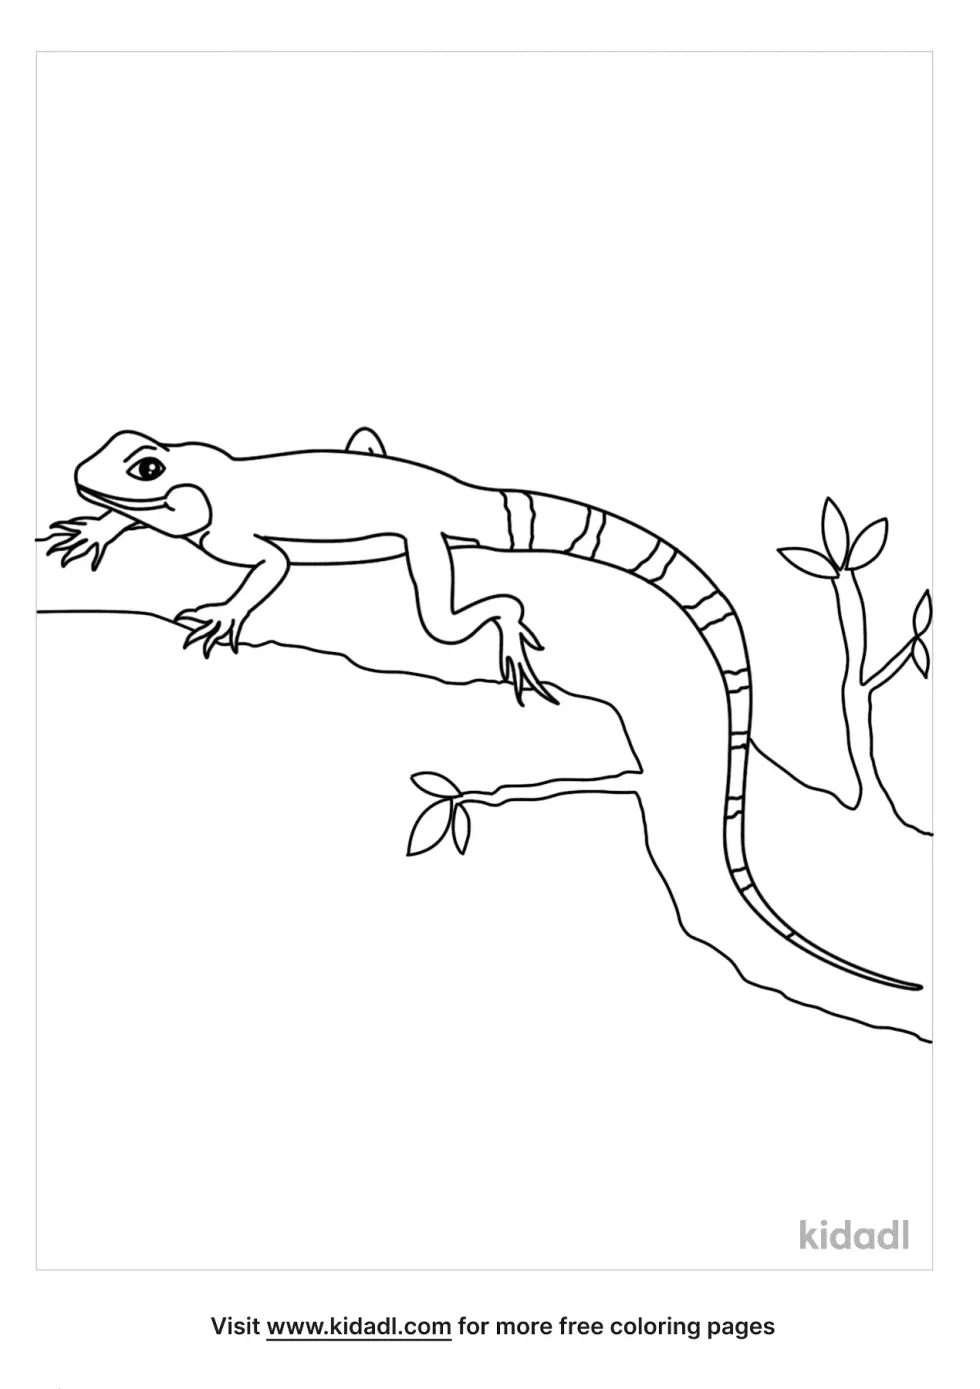 Chinese Water Dragon Coloring Page